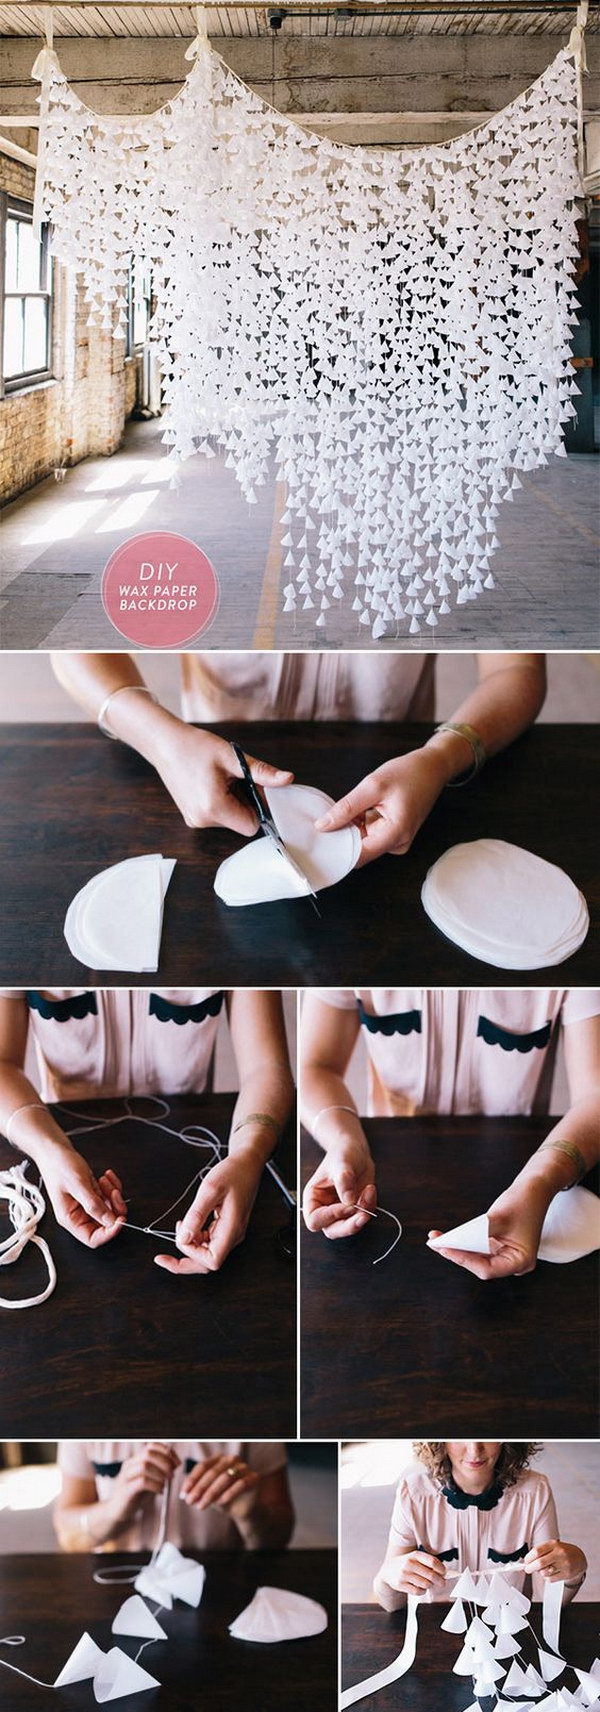 DIY Wax Paper Photo Booth Backdrop 